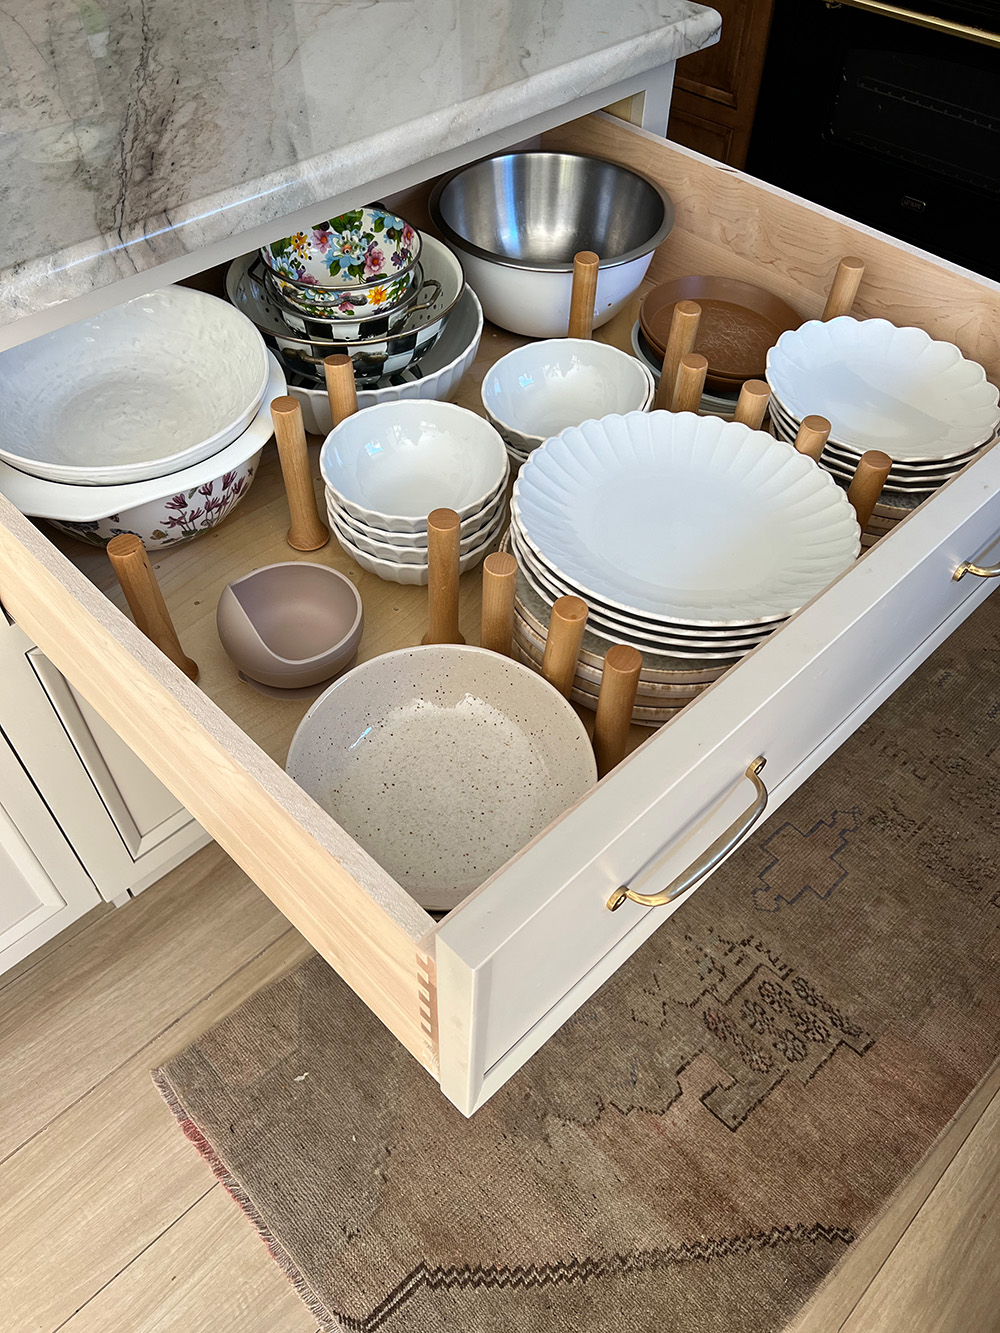 https://www.brepurposed.com/wp-content/uploads/2022/10/drawer-storage-for-dishes-and-bowls.jpg